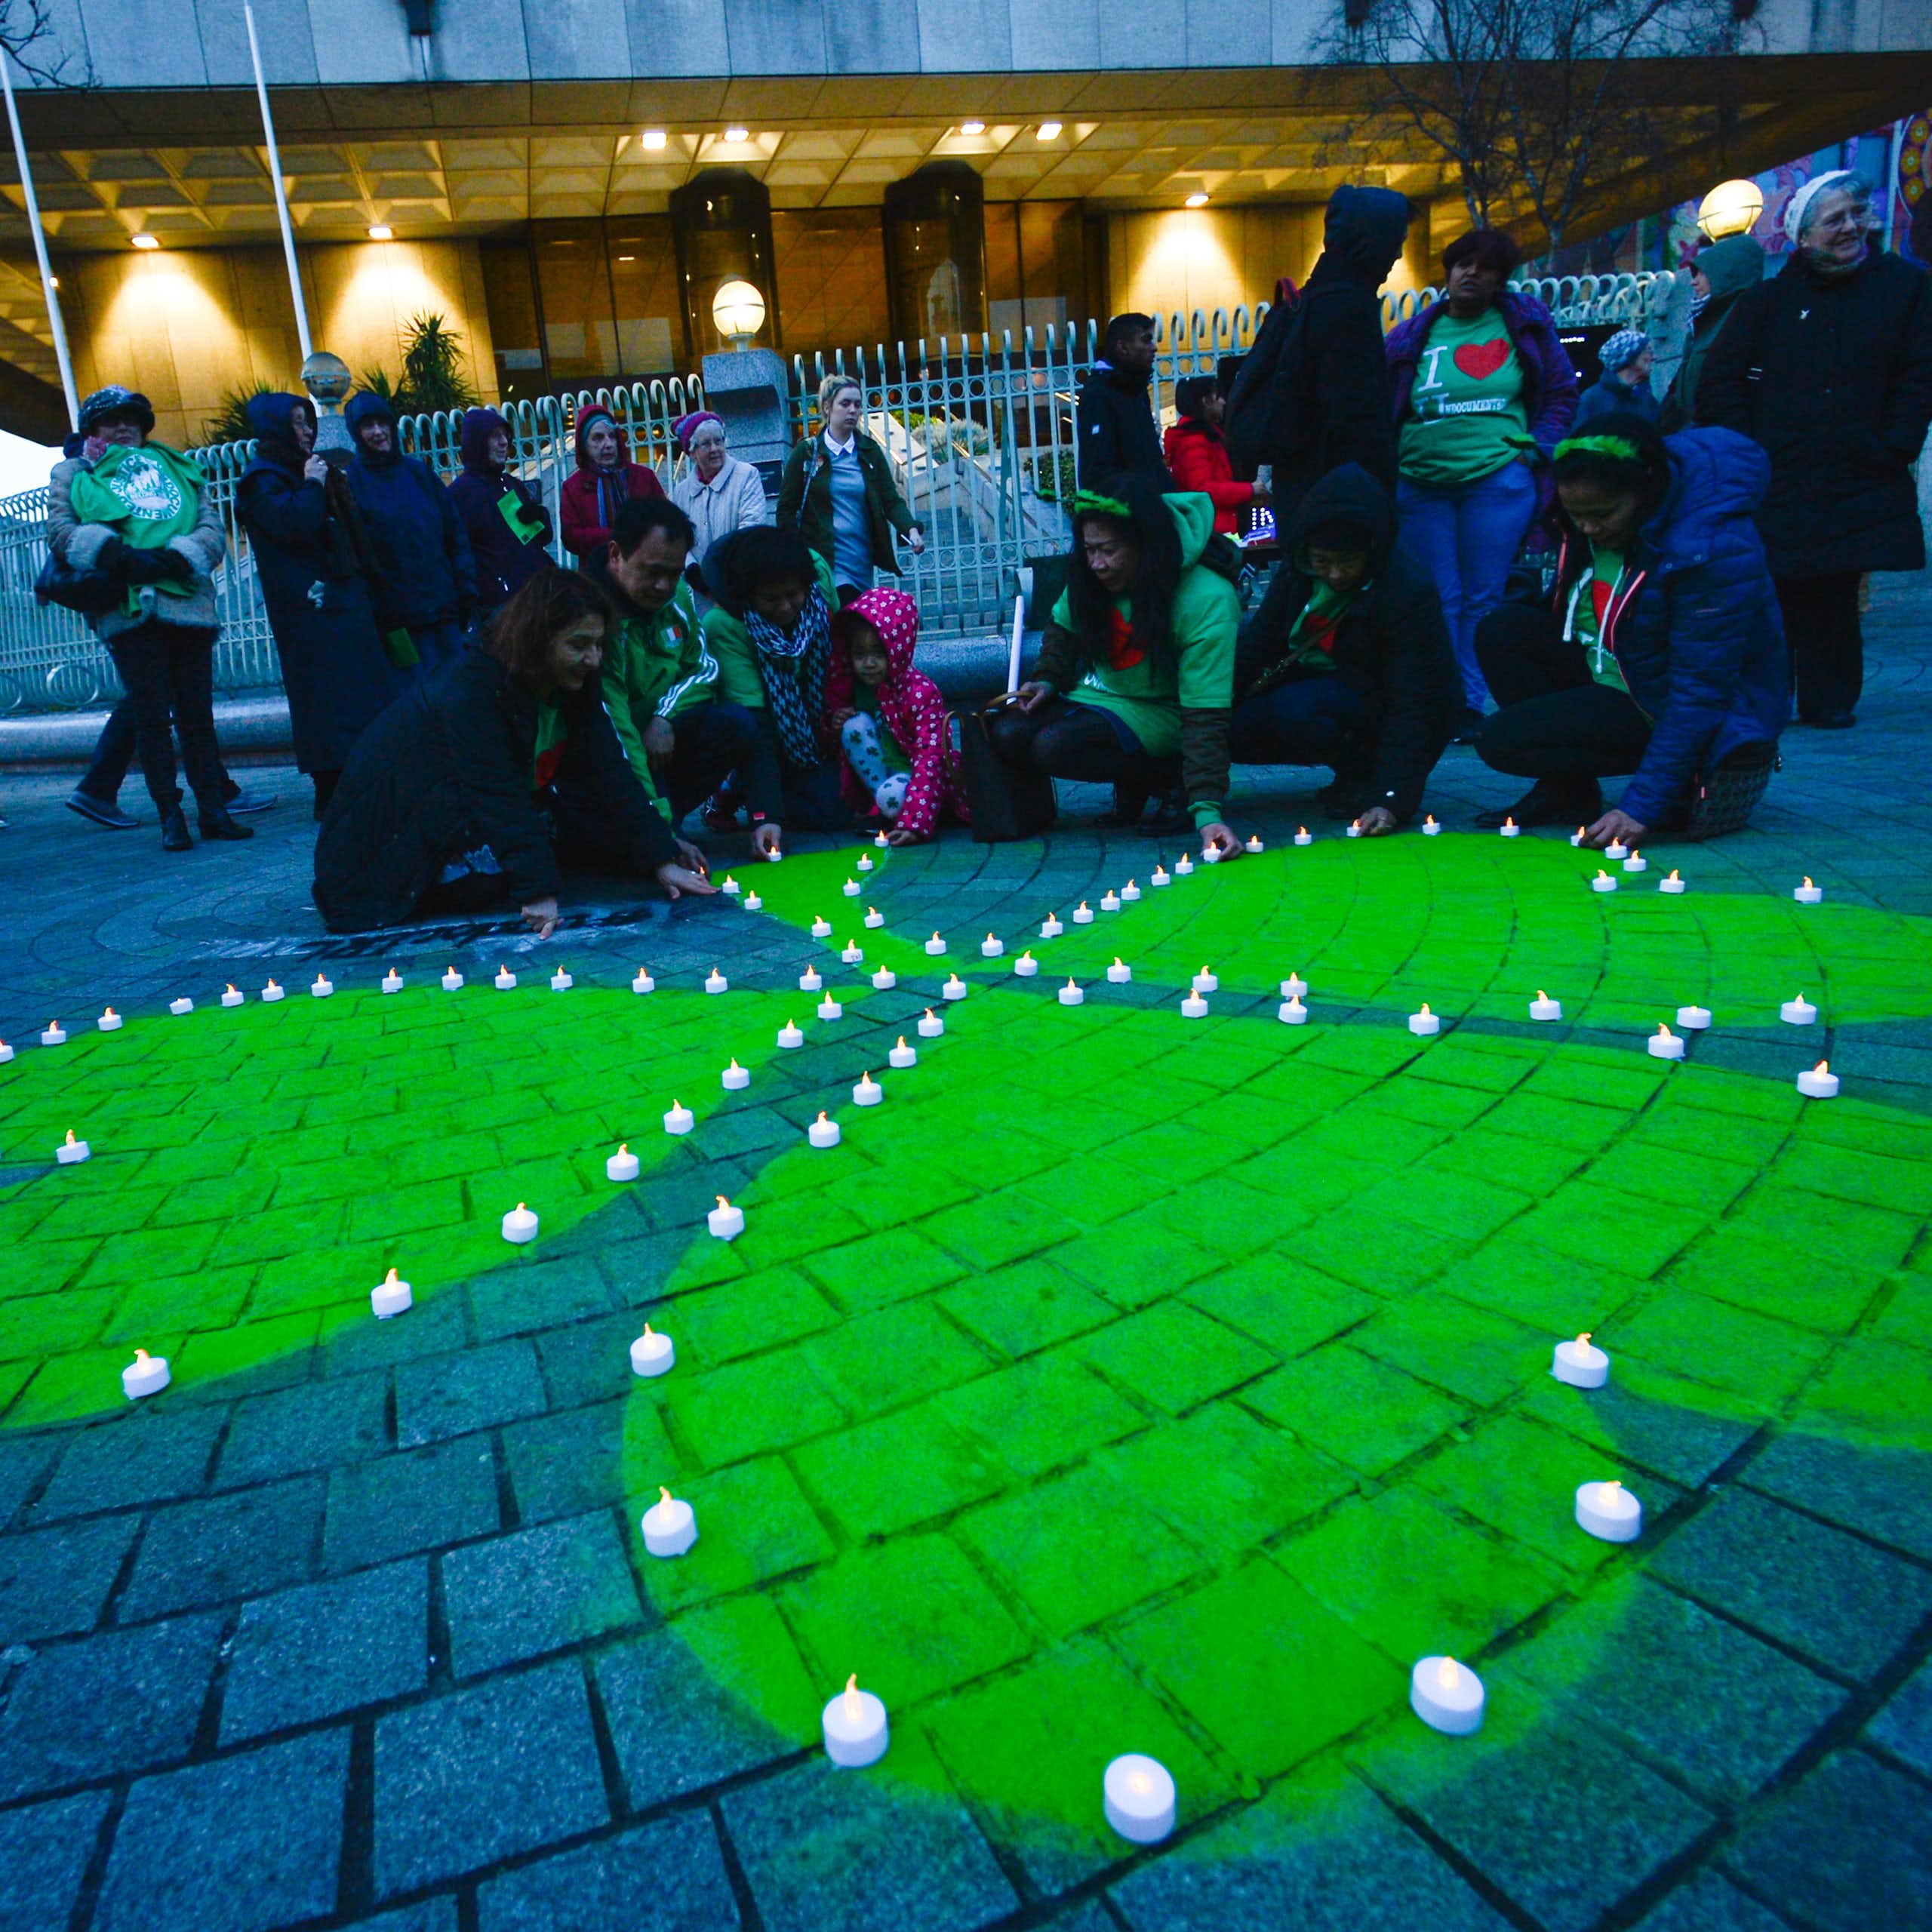 A green shamrock is painted on stone pavement surrounded by people in 'I heart Ireland' T-shirts.